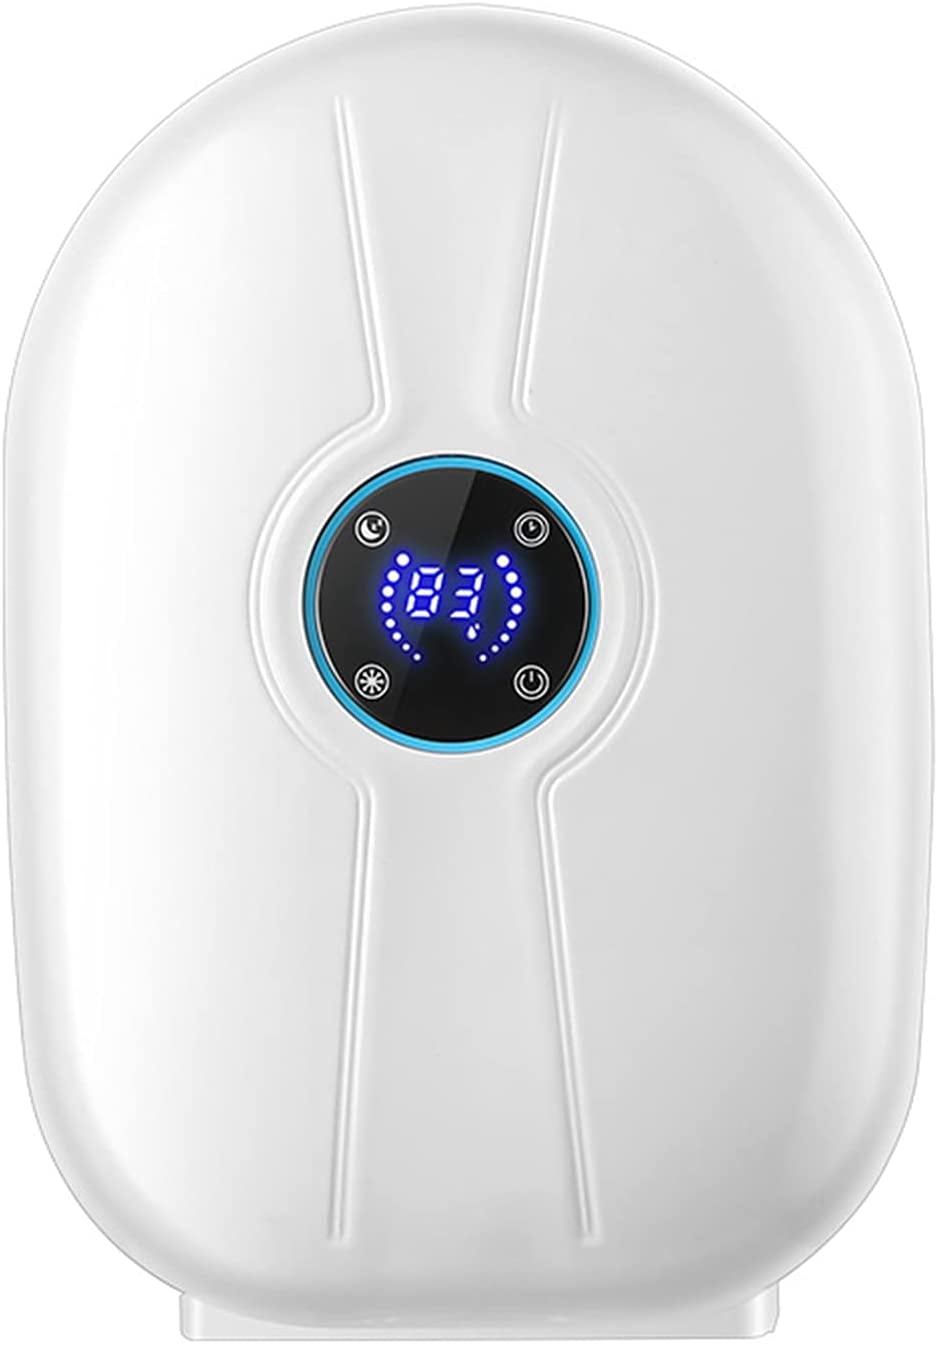 Dehumidifier for Home Small Portable Quiet Dehumidifiers with 